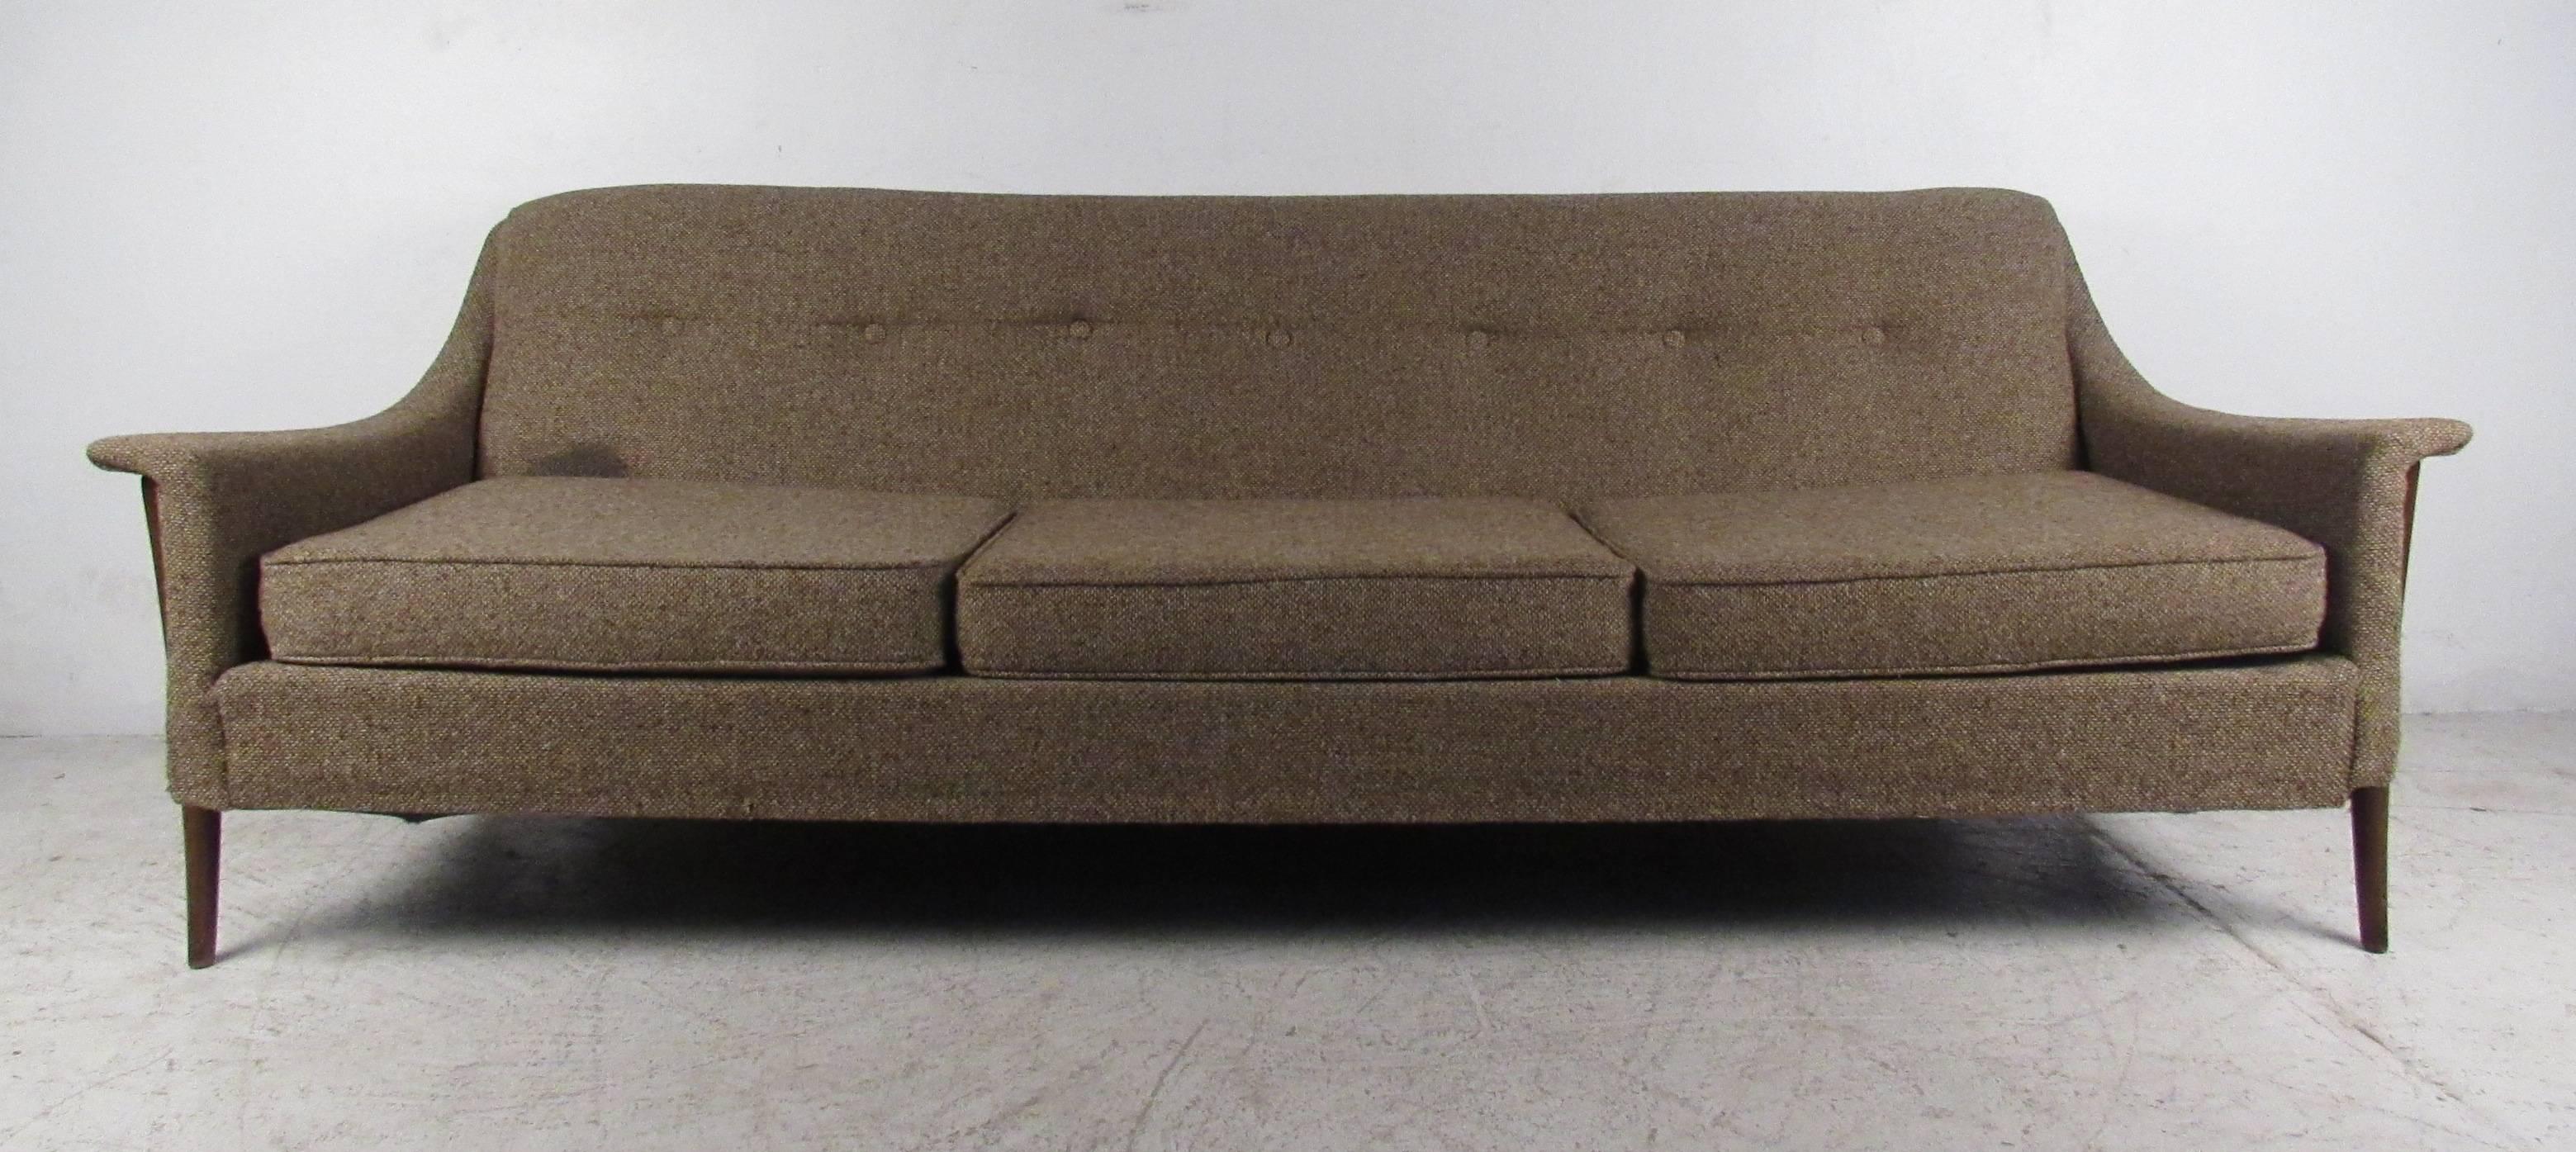 Stylish Scandinavian modern three-seat tufted back sofa by DUX. Please confirm item location (NY or NJ) with dealer.